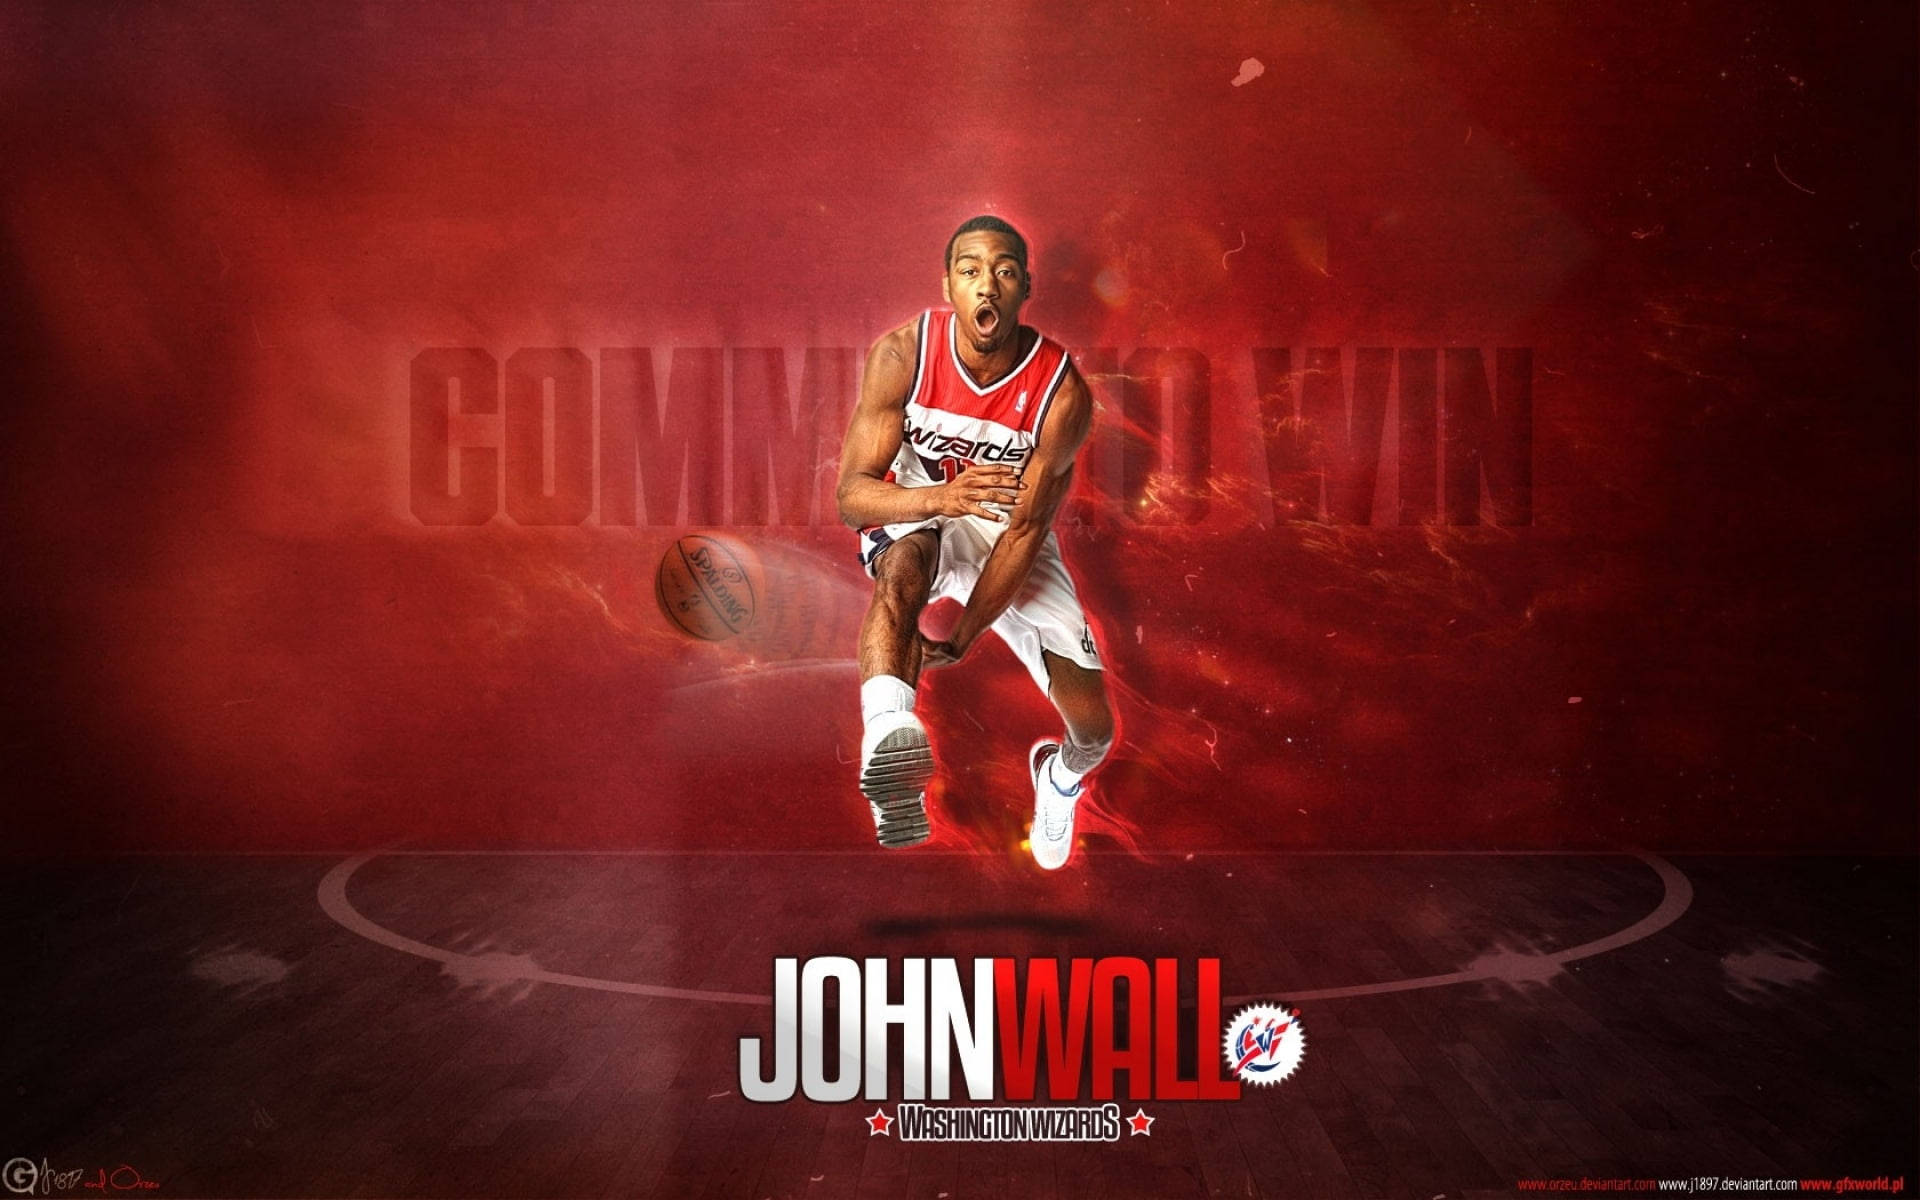 Dynamic Action In The Washington Wizards Game Background